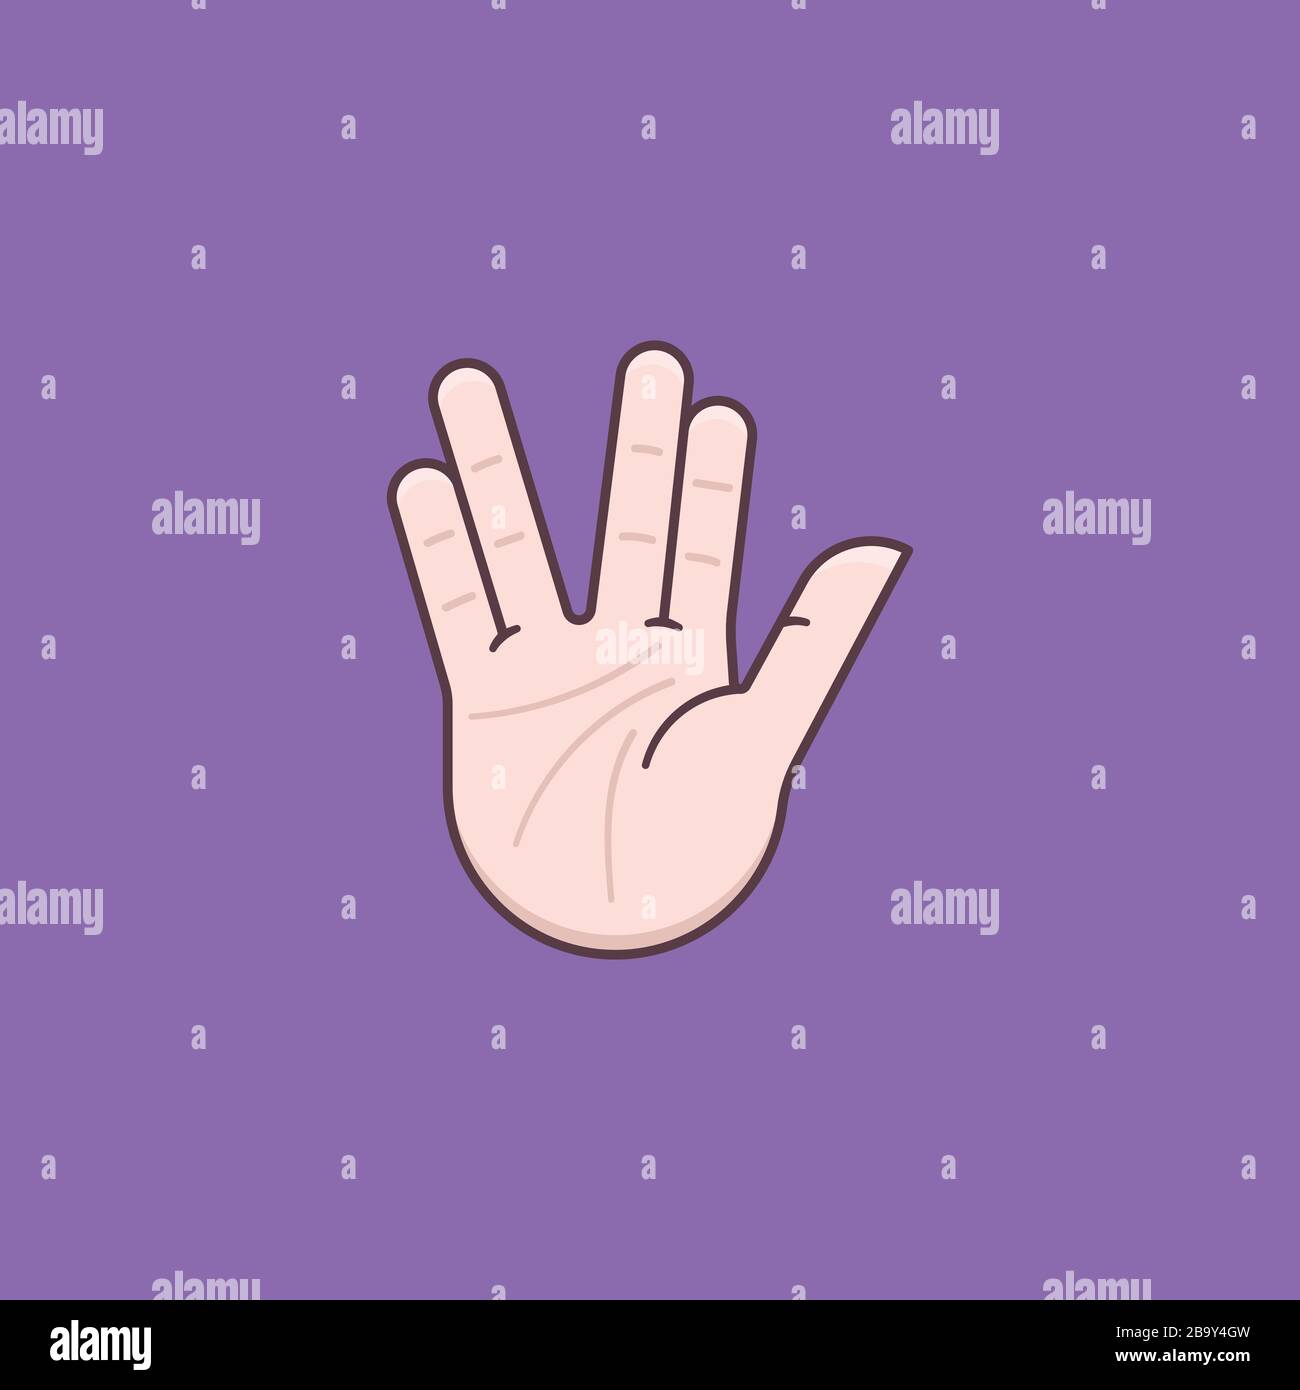 Vulcan salute hand gesture vector illustration for First Contact Day on April 5th. Science Fiction appreciation symbol. Stock Vector